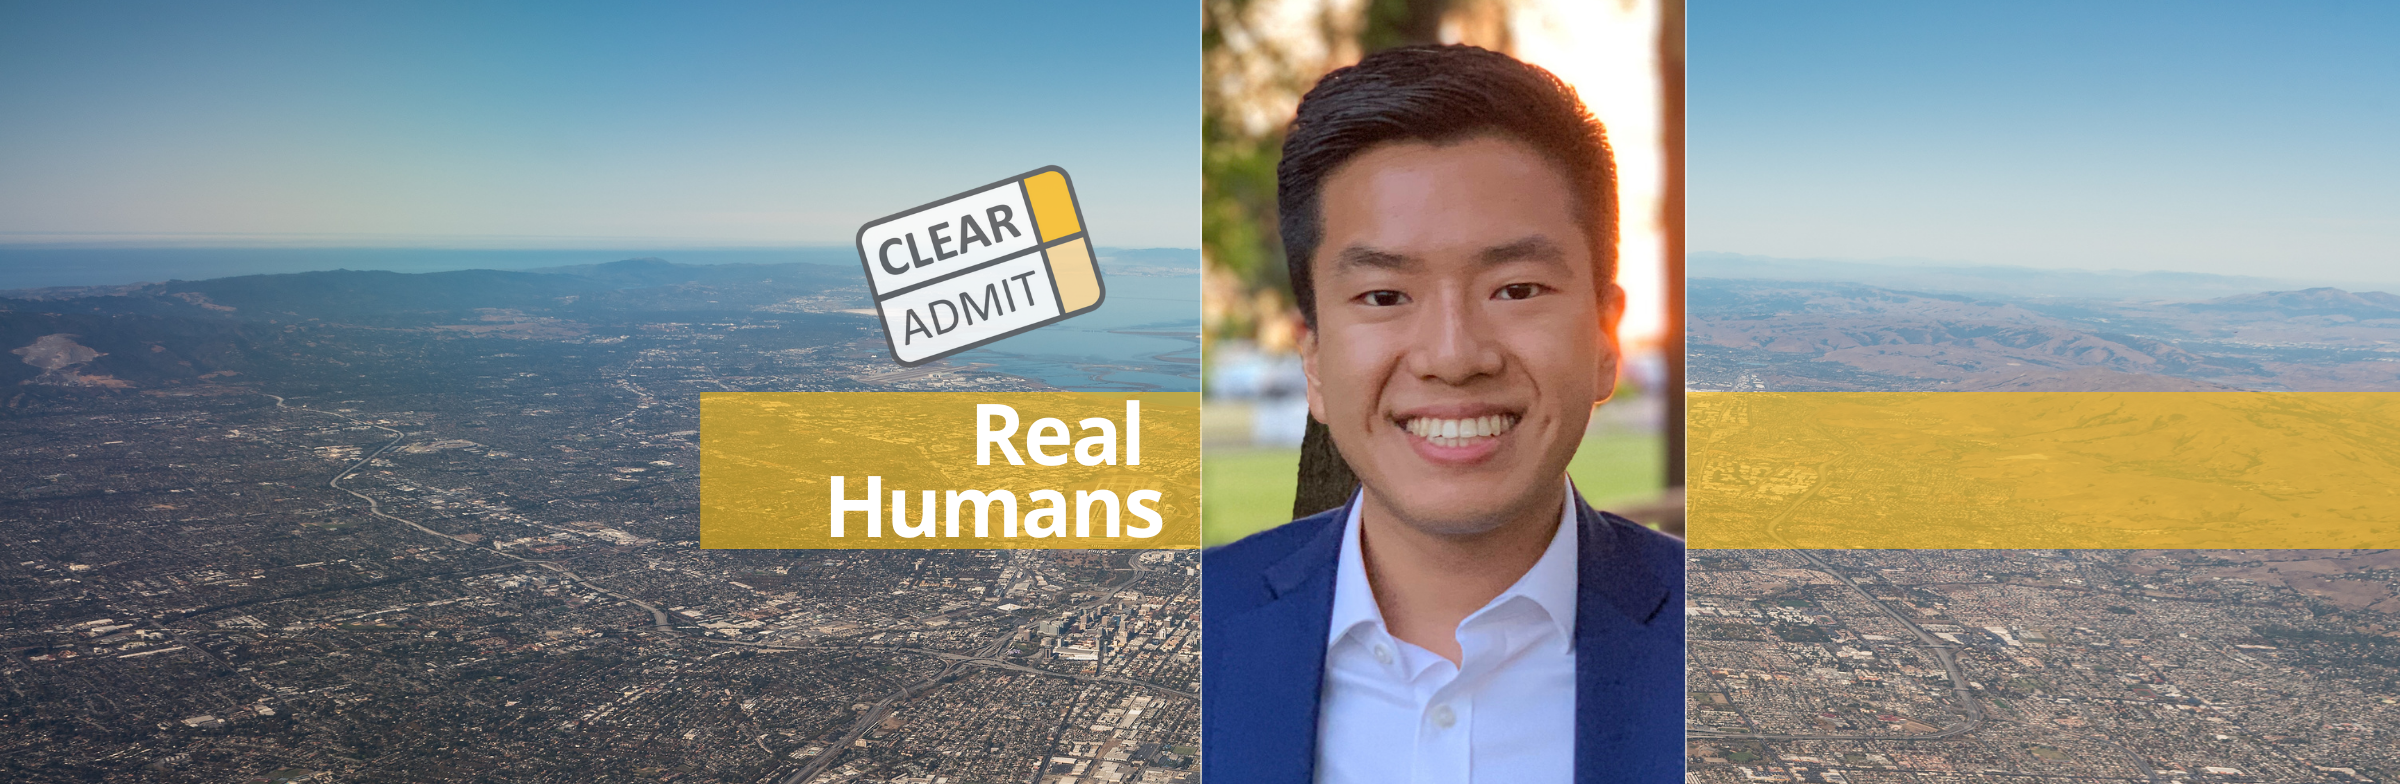 Image for Real Humans of Google: Ryan Yu, HBS MBA ’21, Product Manager | Google Cloud AI